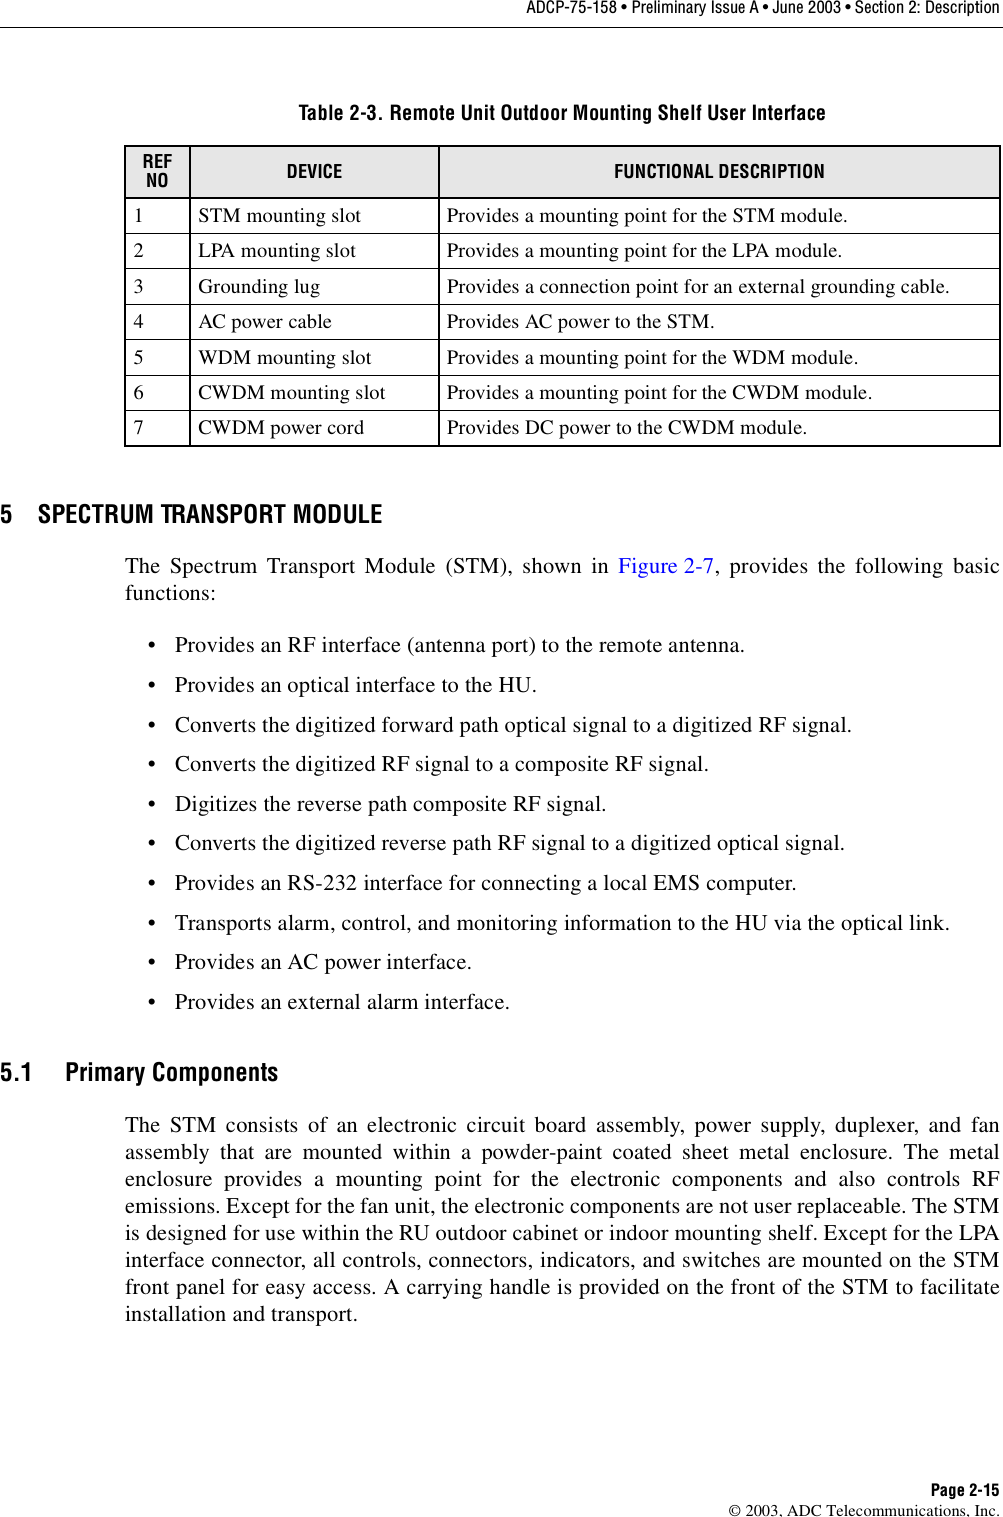 ADCP-75-158 • Preliminary Issue A • June 2003 • Section 2: DescriptionPage 2-15© 2003, ADC Telecommunications, Inc.5 SPECTRUM TRANSPORT MODULEThe Spectrum Transport Module (STM), shown in Figure 2-7, provides the following basicfunctions:• Provides an RF interface (antenna port) to the remote antenna. • Provides an optical interface to the HU. • Converts the digitized forward path optical signal to a digitized RF signal. • Converts the digitized RF signal to a composite RF signal. • Digitizes the reverse path composite RF signal. • Converts the digitized reverse path RF signal to a digitized optical signal. • Provides an RS-232 interface for connecting a local EMS computer. • Transports alarm, control, and monitoring information to the HU via the optical link. • Provides an AC power interface. • Provides an external alarm interface. 5.1 Primary ComponentsThe STM consists of an electronic circuit board assembly, power supply, duplexer, and fanassembly that are mounted within a powder-paint coated sheet metal enclosure. The metalenclosure provides a mounting point for the electronic components and also controls RFemissions. Except for the fan unit, the electronic components are not user replaceable. The STMis designed for use within the RU outdoor cabinet or indoor mounting shelf. Except for the LPAinterface connector, all controls, connectors, indicators, and switches are mounted on the STMfront panel for easy access. A carrying handle is provided on the front of the STM to facilitateinstallation and transport. Table 2-3. Remote Unit Outdoor Mounting Shelf User InterfaceREF NO DEVICE FUNCTIONAL DESCRIPTION1 STM mounting slot Provides a mounting point for the STM module.2 LPA mounting slot Provides a mounting point for the LPA module.3 Grounding lug Provides a connection point for an external grounding cable. 4 AC power cable Provides AC power to the STM.5 WDM mounting slot Provides a mounting point for the WDM module. 6 CWDM mounting slot Provides a mounting point for the CWDM module.7 CWDM power cord Provides DC power to the CWDM module.